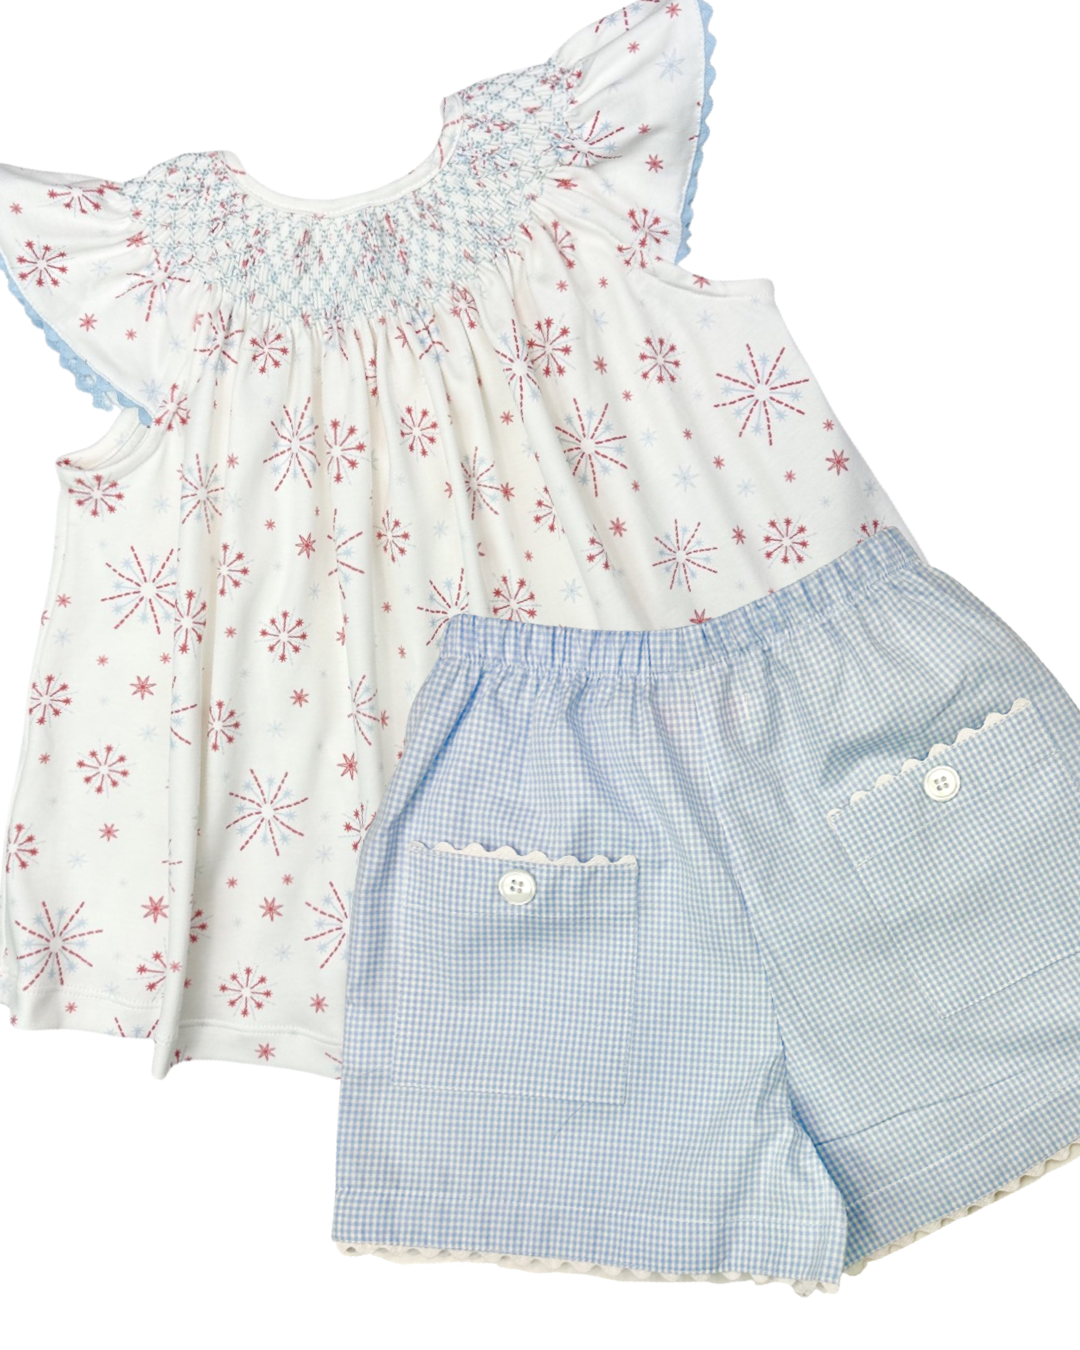 Two Pocket Short - Baby Blue Gingham (Size 5)